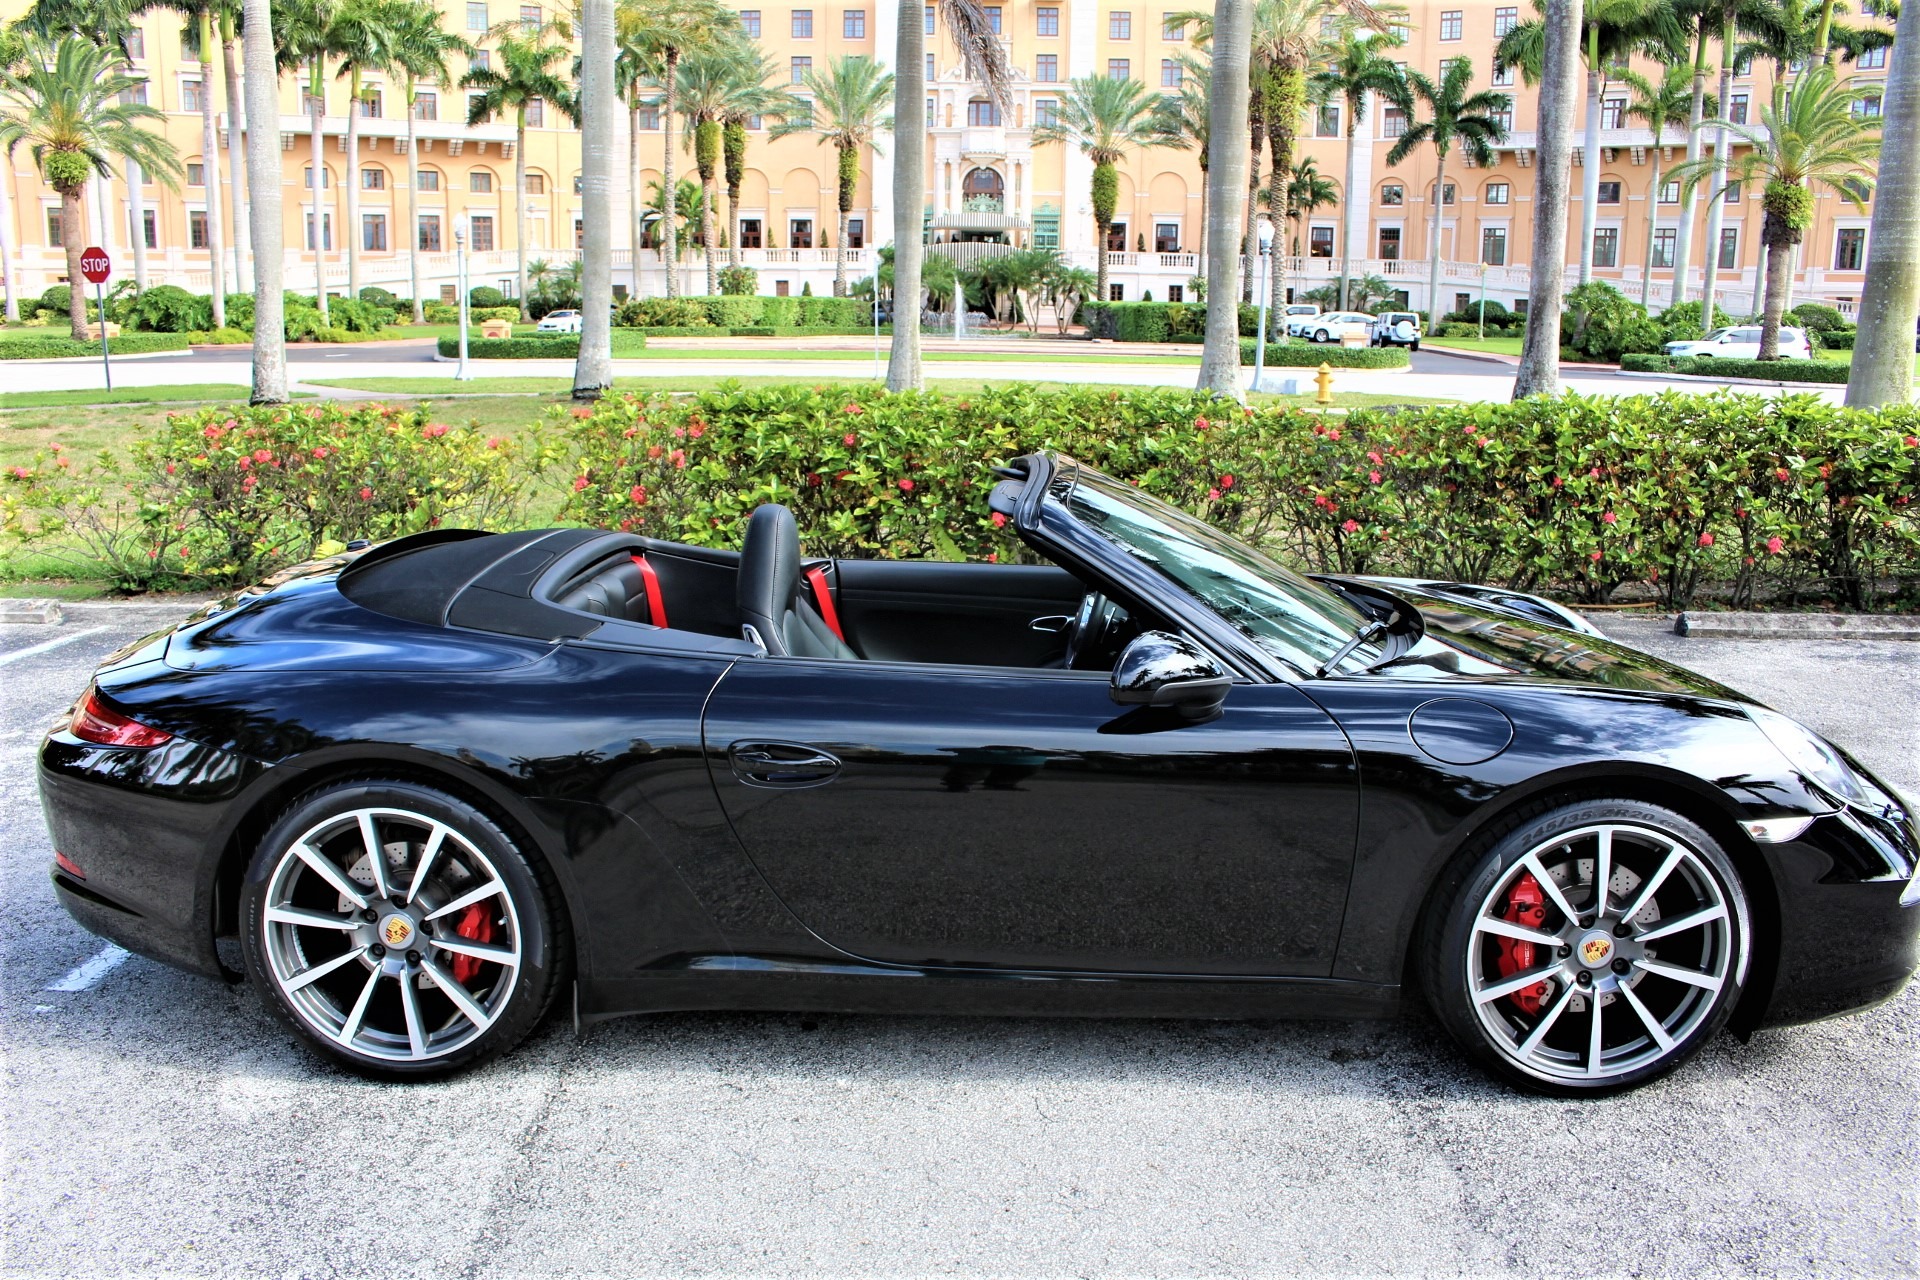 Used 2013 Porsche 911 Carrera S for sale Sold at The Gables Sports Cars in Miami FL 33146 2